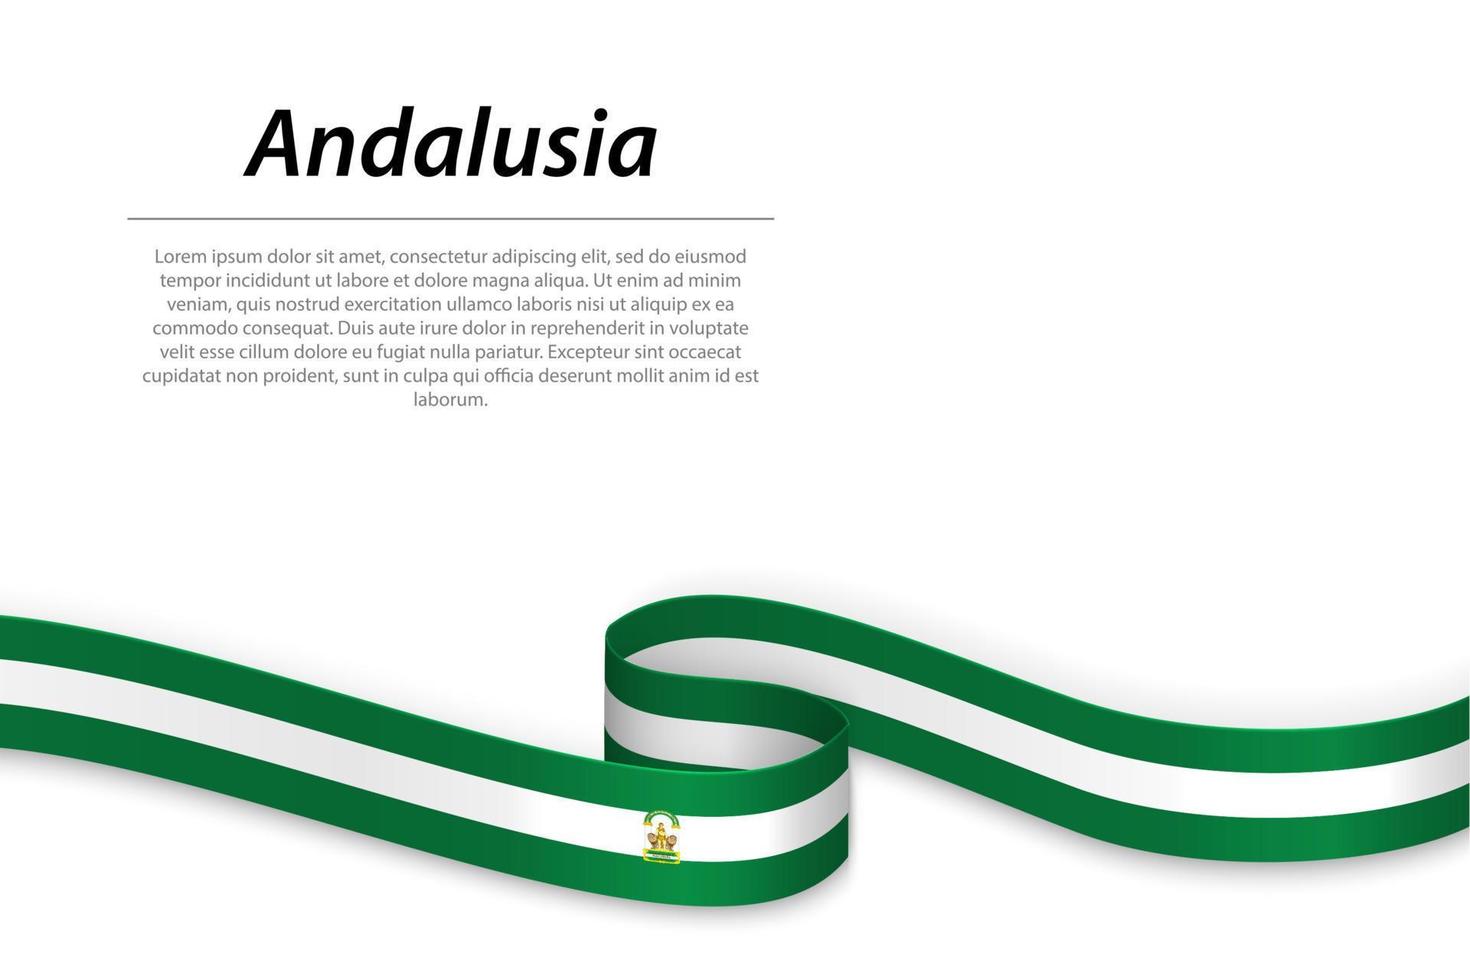 Waving ribbon or banner with flag of Andalusia vector